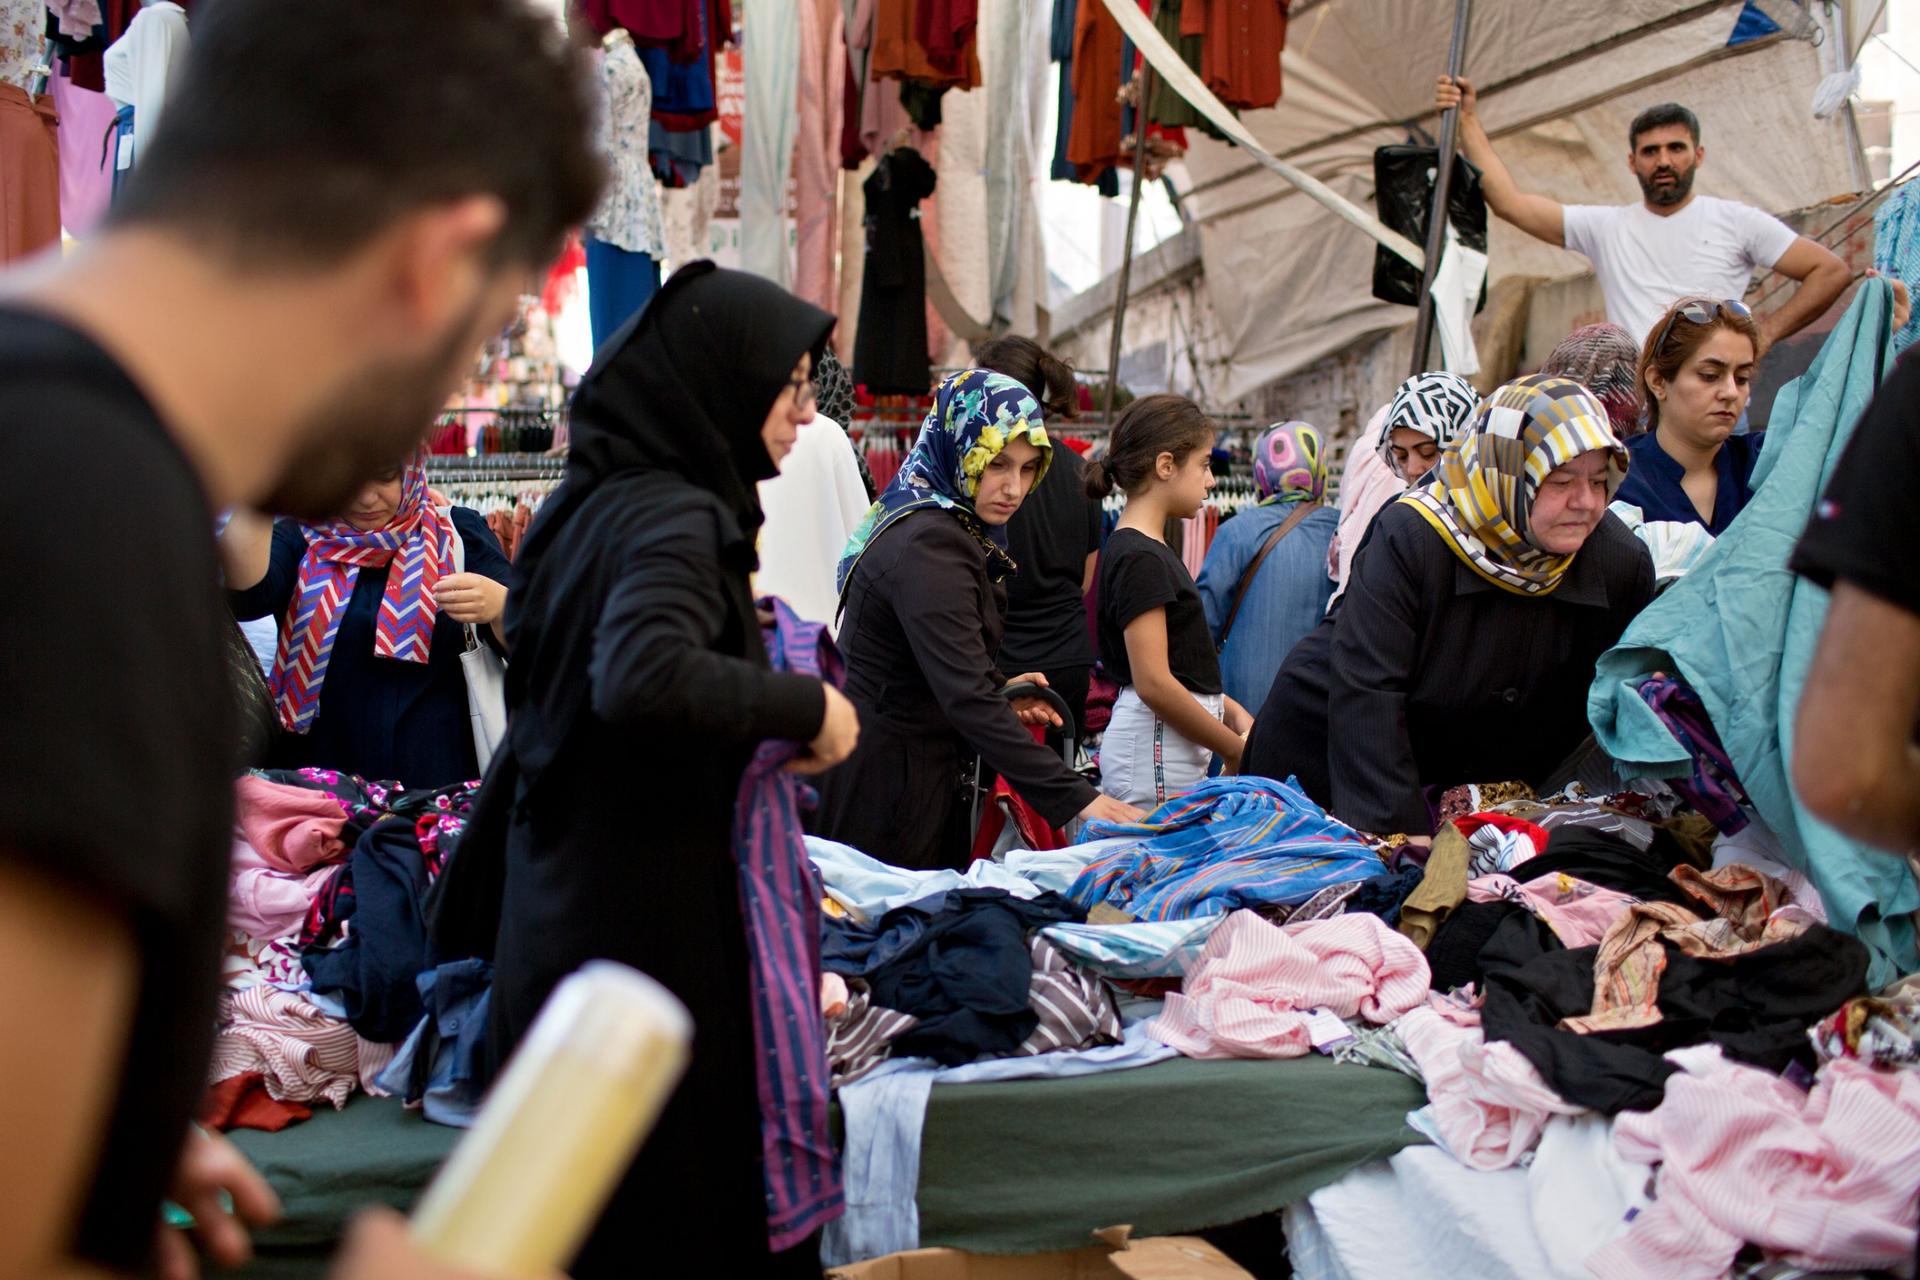 Several women wearing head shalls are show shopping at a market.